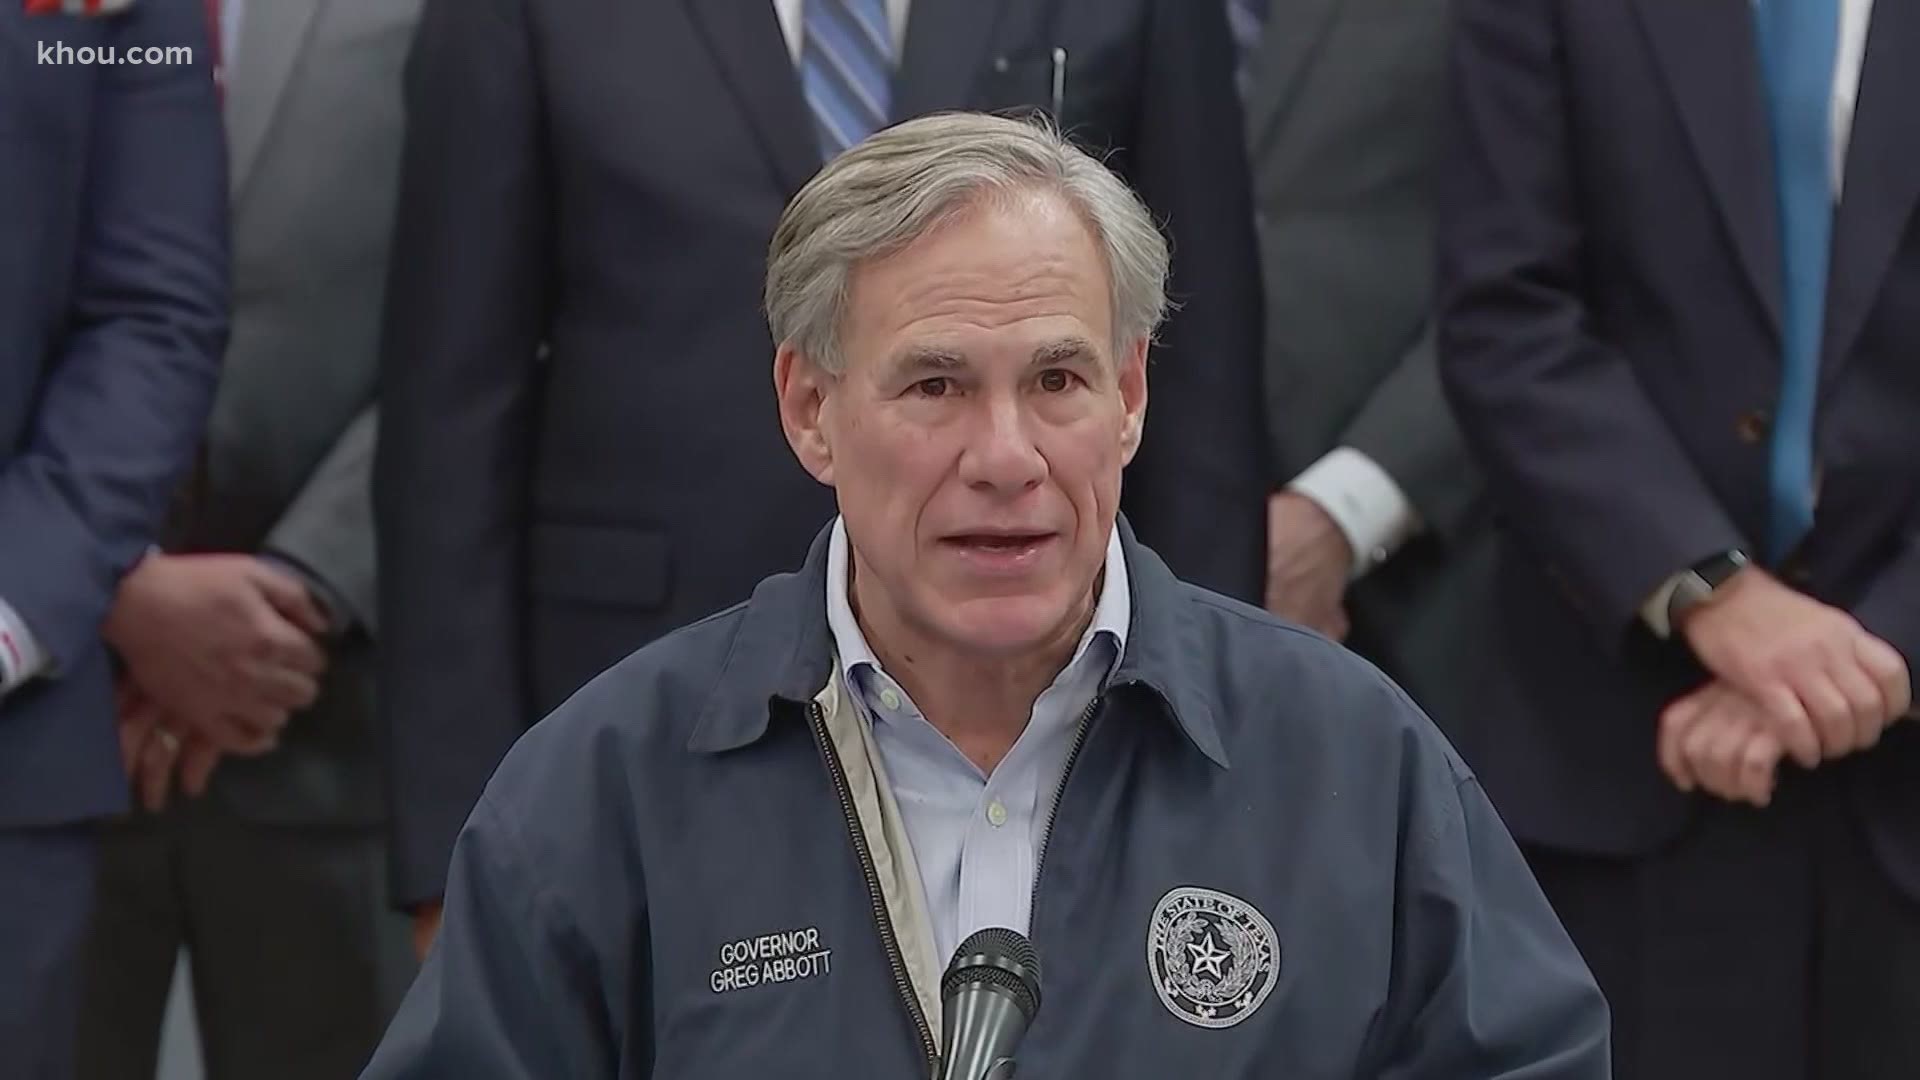 Governor Greg Abbott promised the Texas National Guard will be ready to respond to any protests that turn violent after Nov. 3.